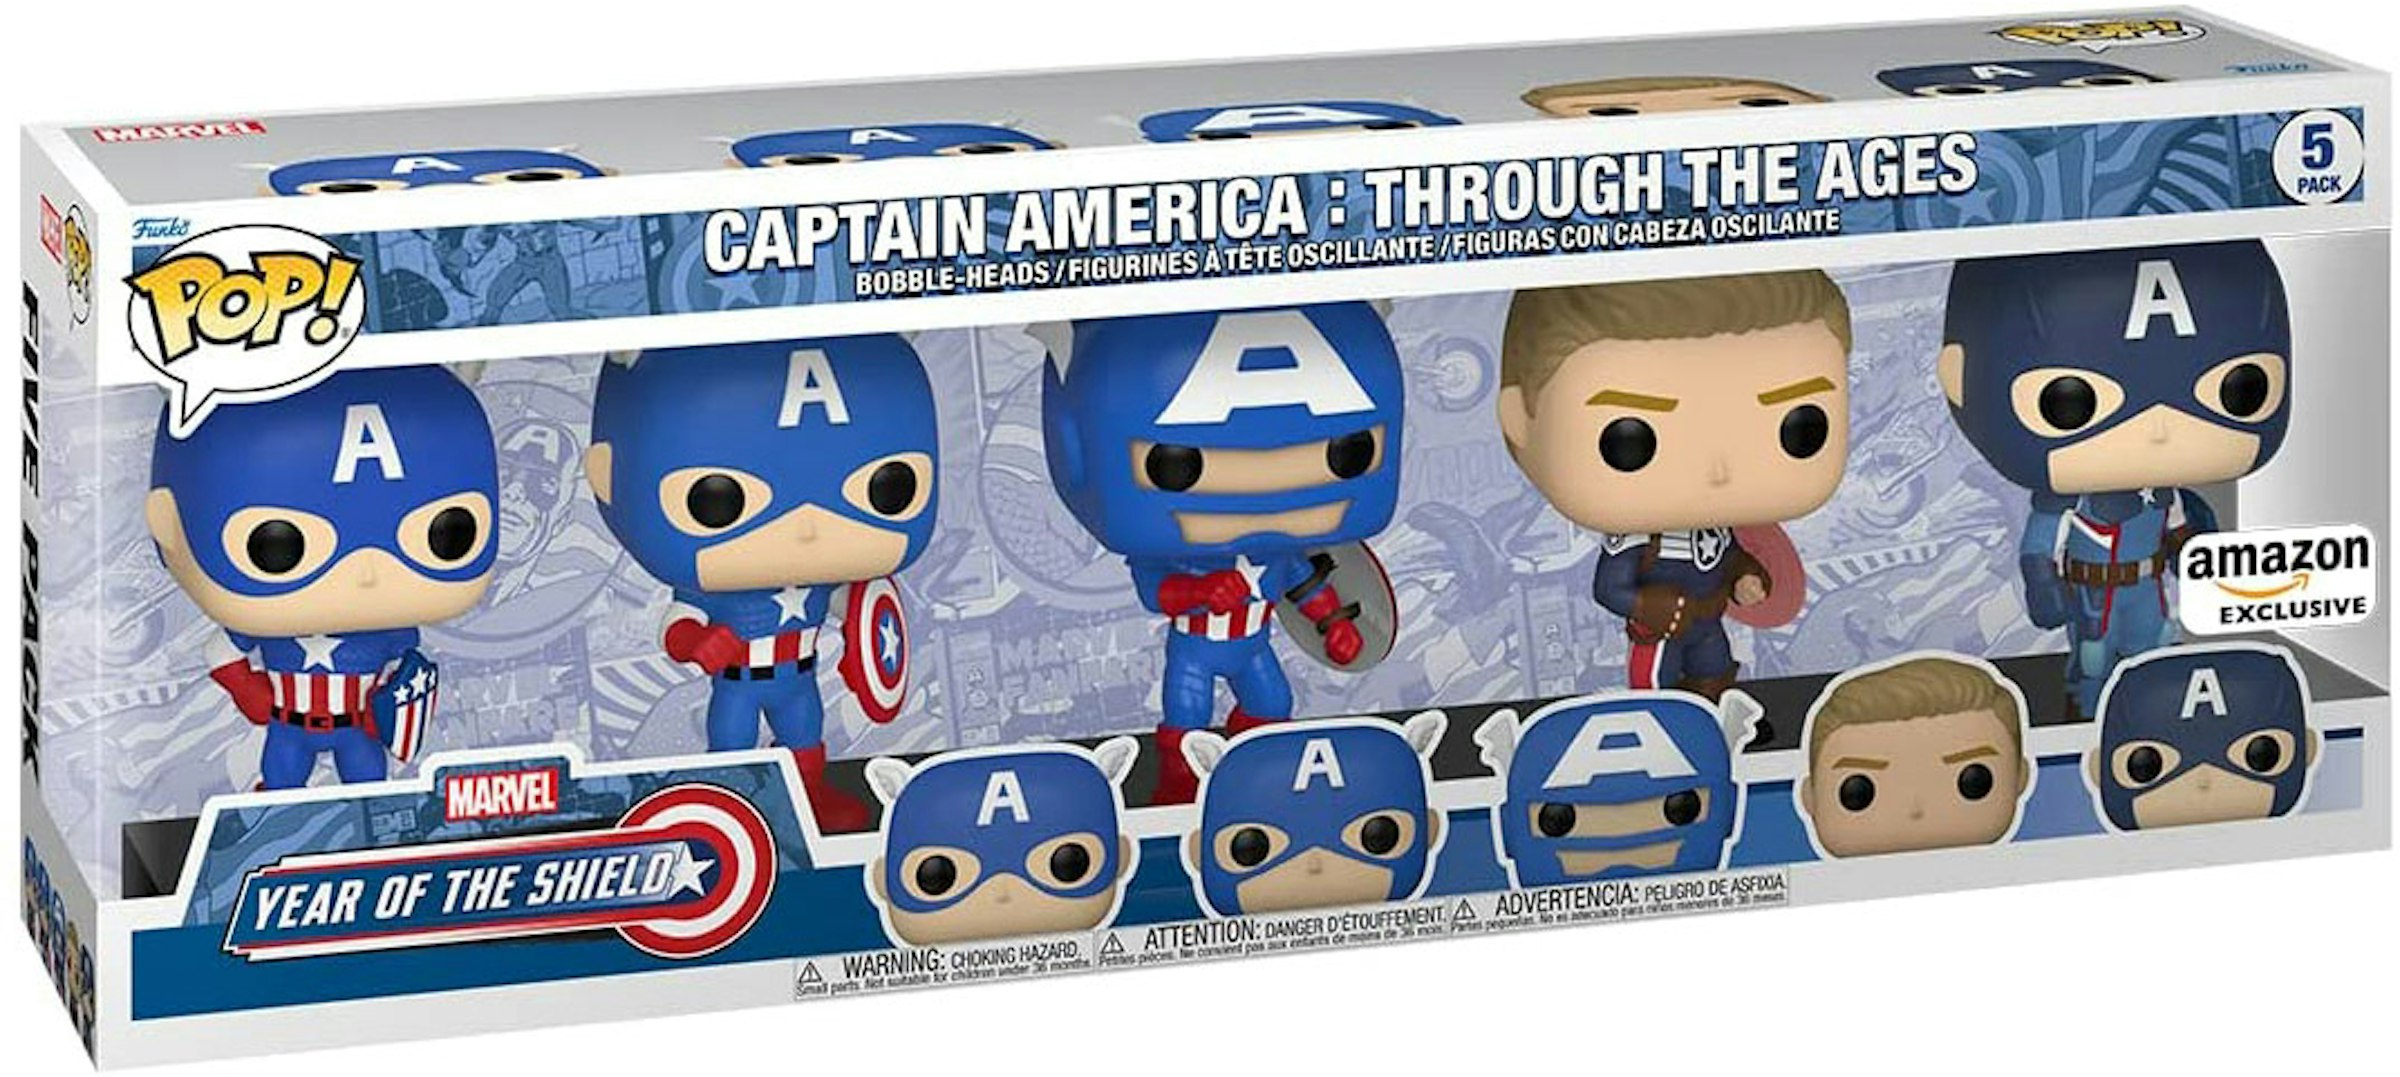 Poesía Cenar Horror Funko Pop! Marvel Year Of The Shield Captain America: Through The Ages  Amazon Exclusive 5-Pack - FW21 - US